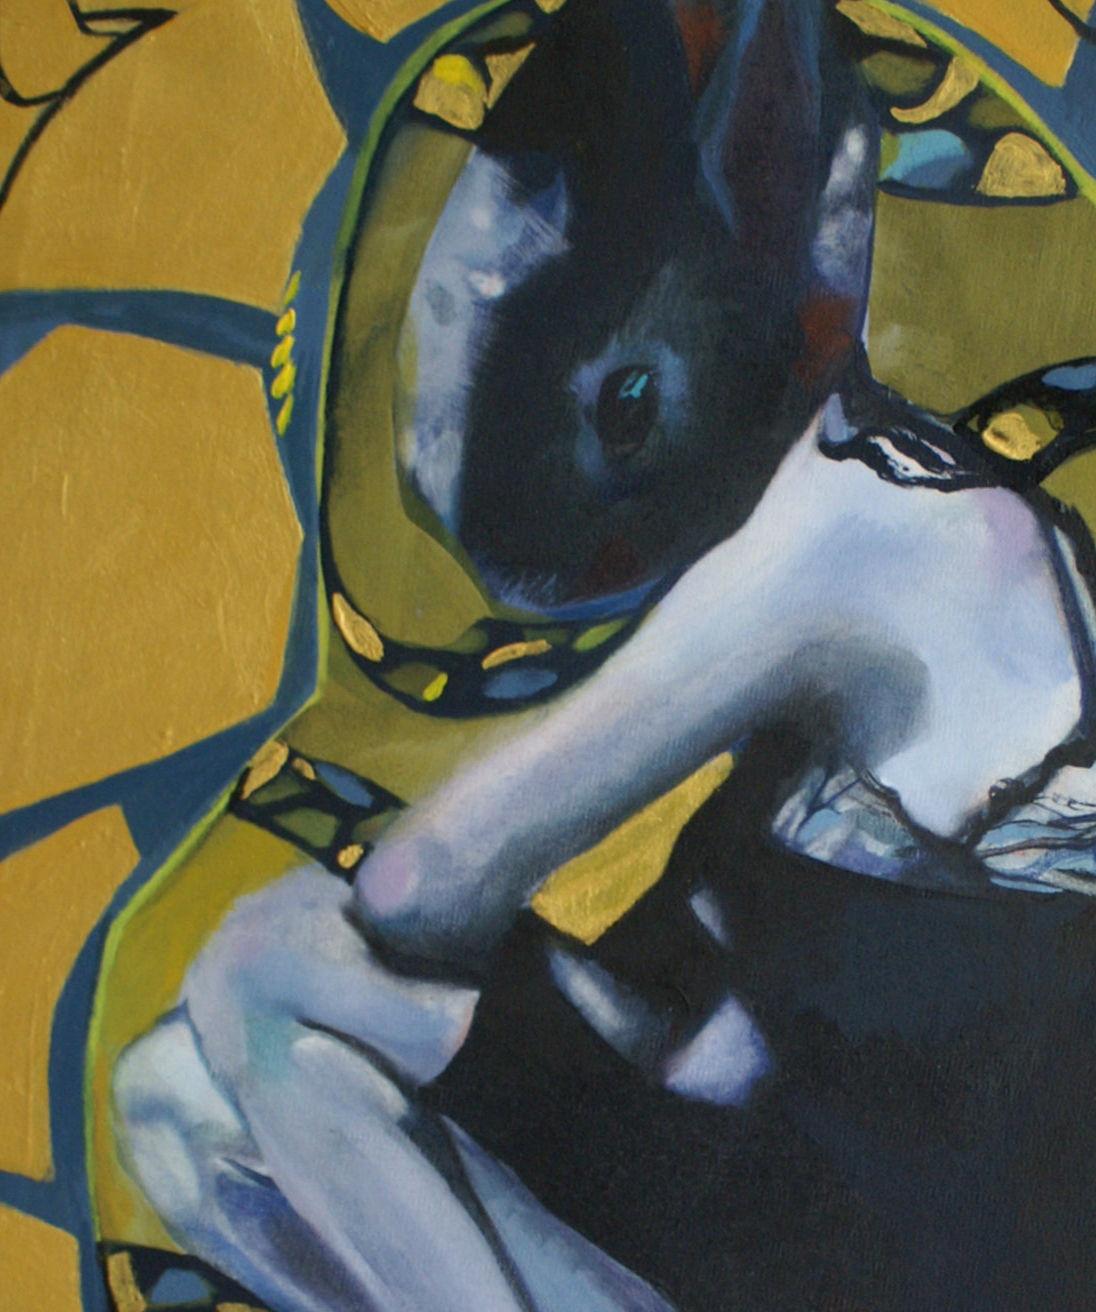 Golden rabbit - XXI century, Oil figurative painting, Bright colours - Painting by Nathalie Pirotte